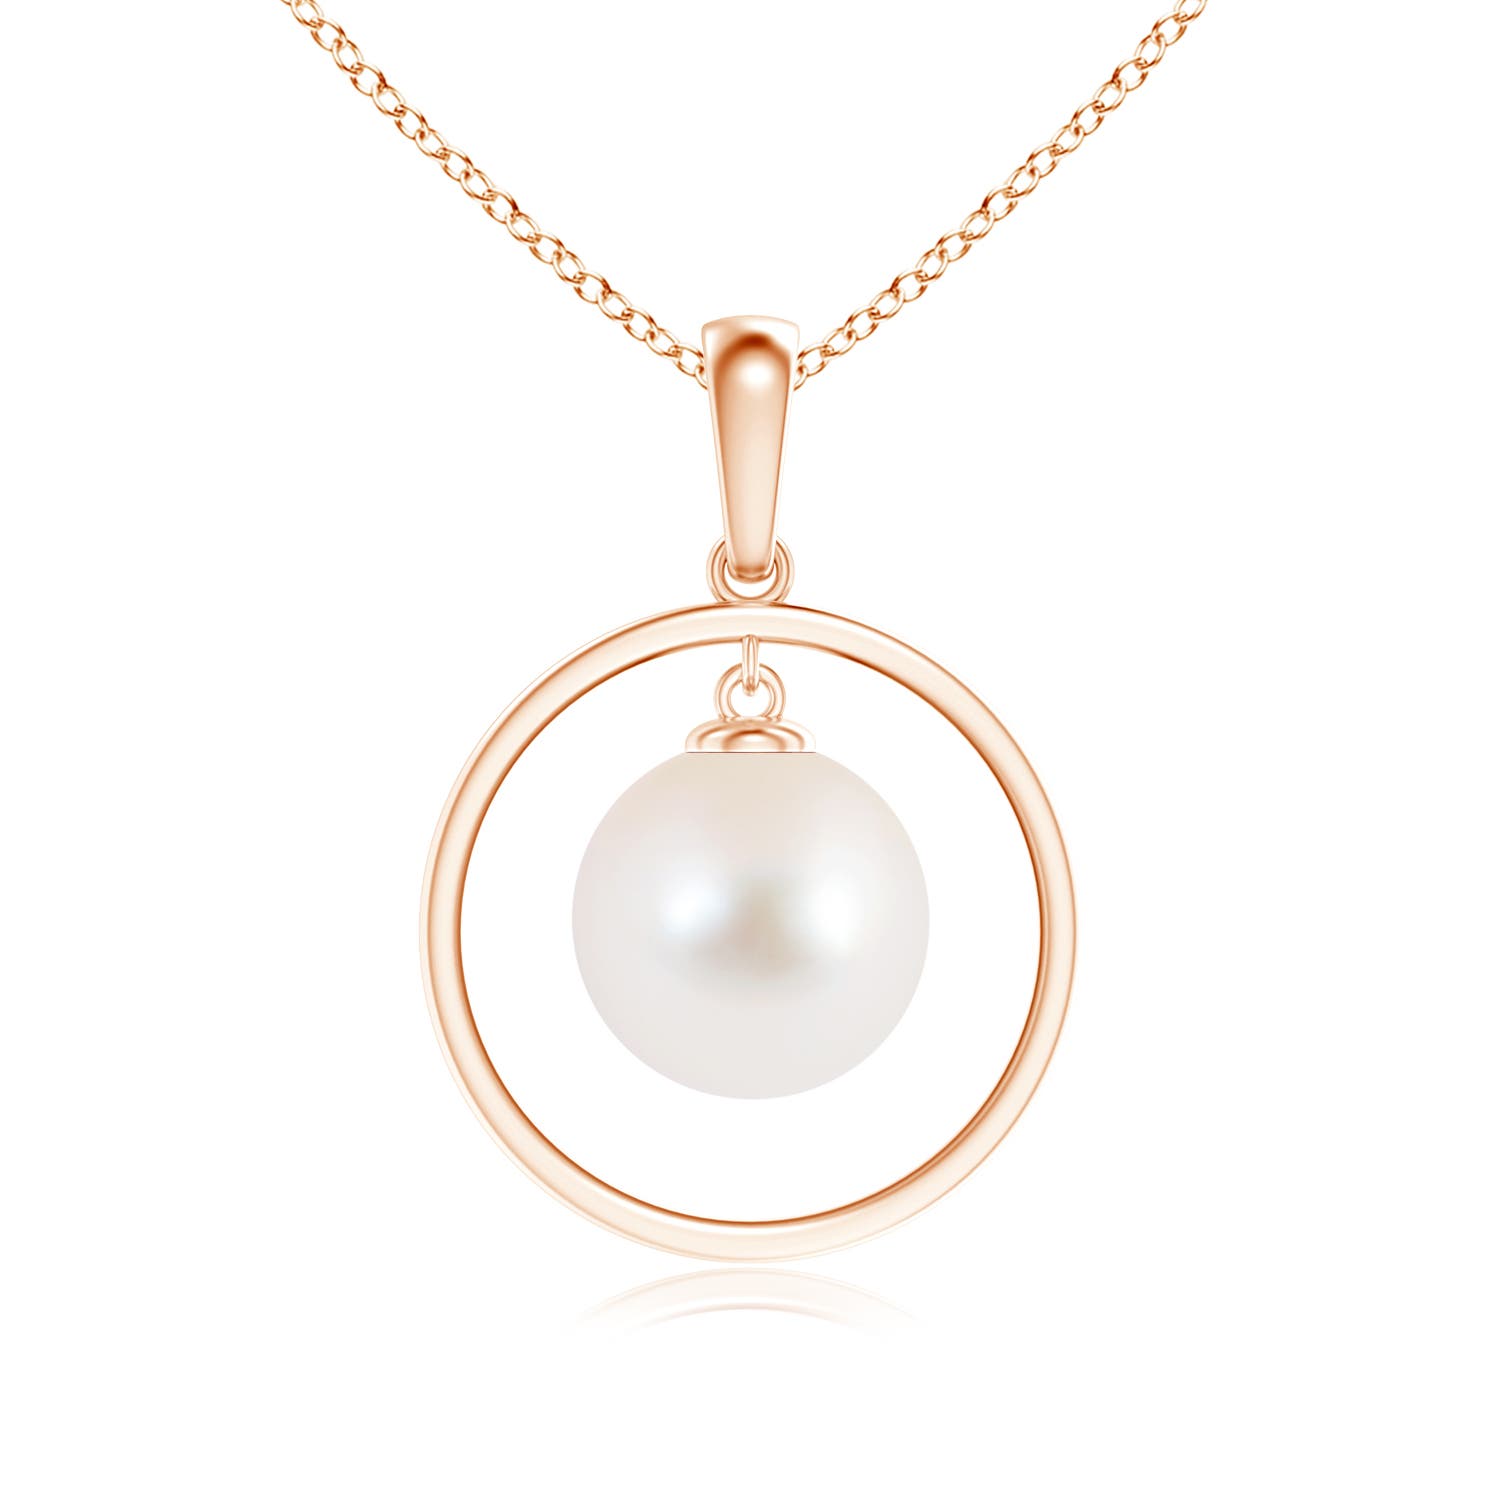 AAA - Freshwater Cultured Pearl / 5.25 CT / 14 KT Rose Gold